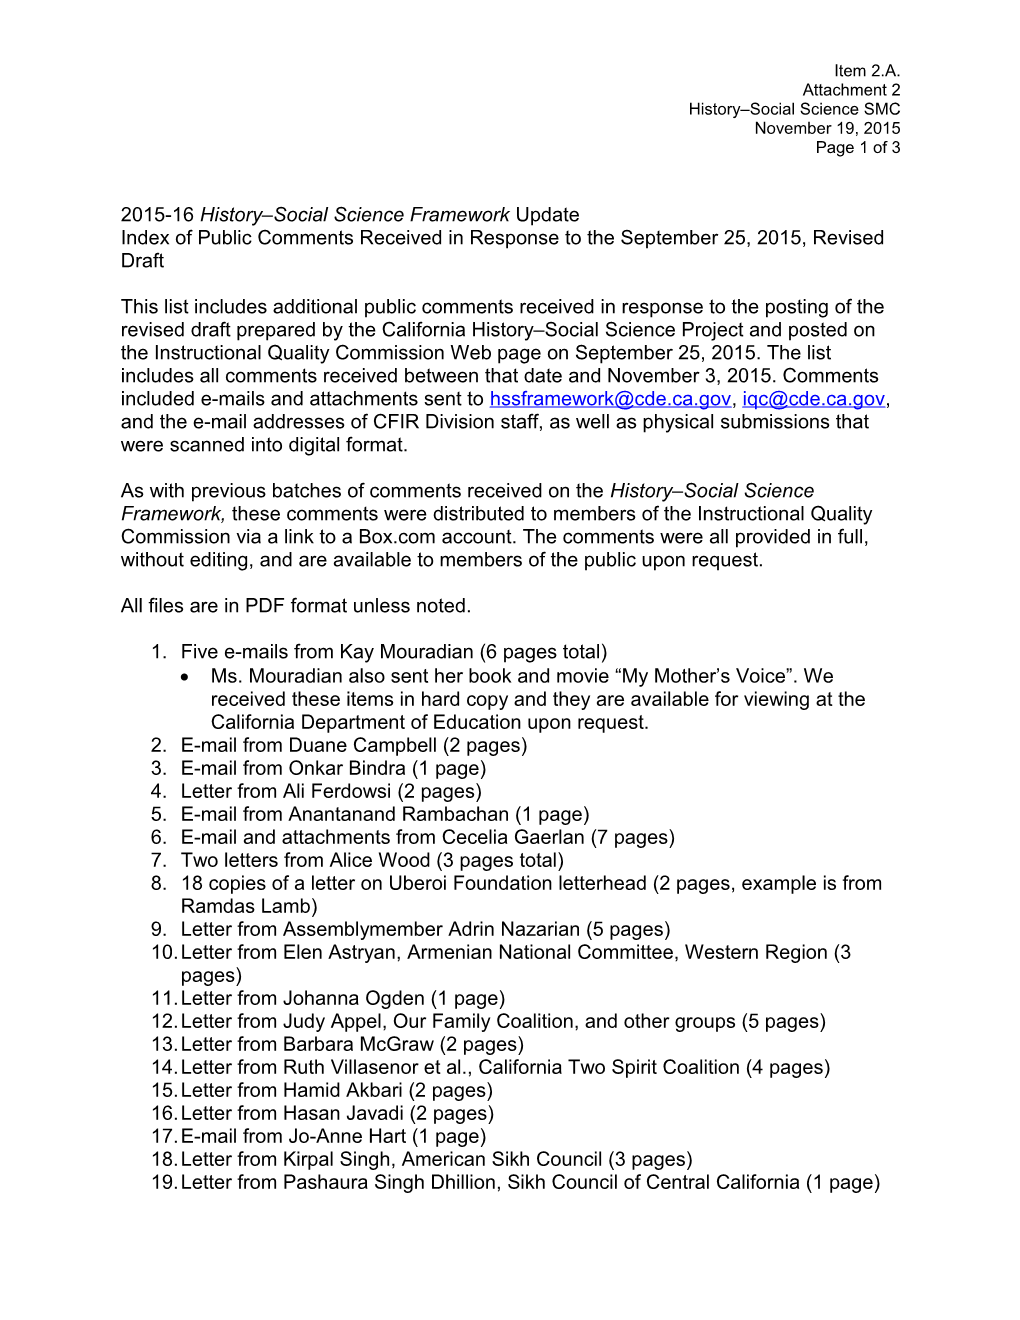 2015-2016 History-Social Science Public Comment - Curriculum Frameworks (CA Dept of Education)